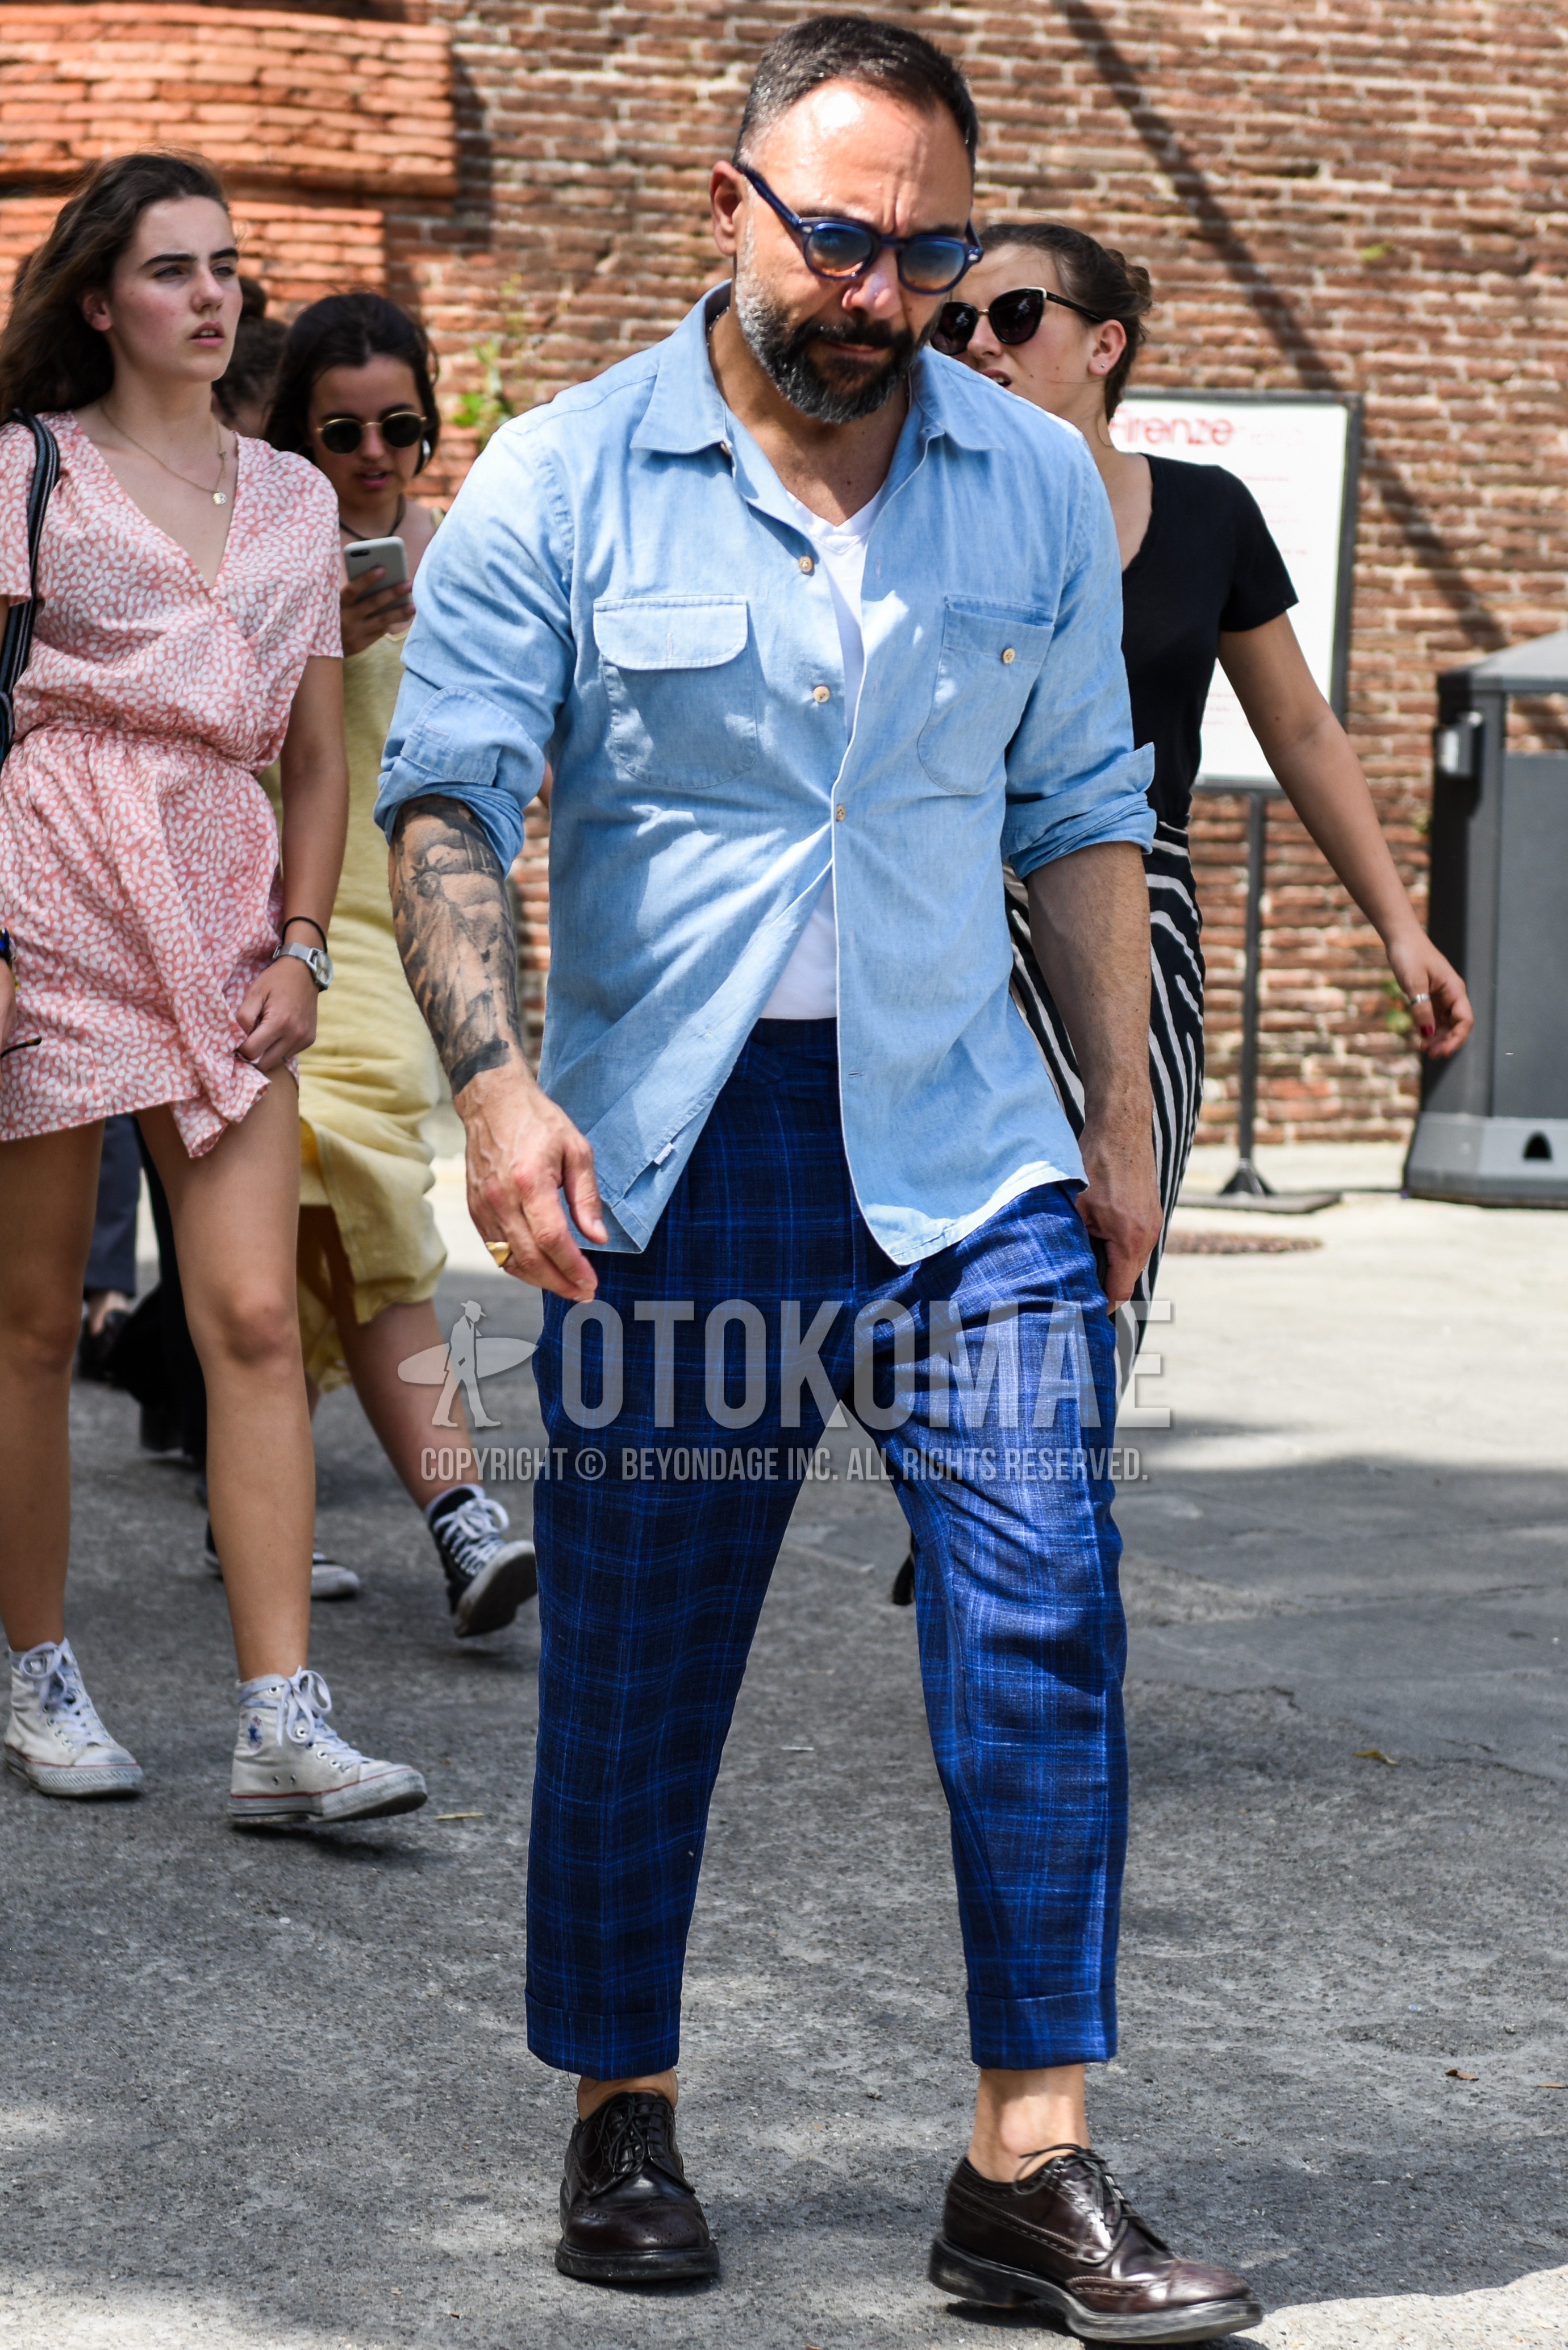 Men's spring summer outfit with navy plain sunglasses, light blue plain denim shirt/chambray shirt, white plain t-shirt, blue check slacks, blue check ankle pants, brown wing-tip shoes leather shoes.